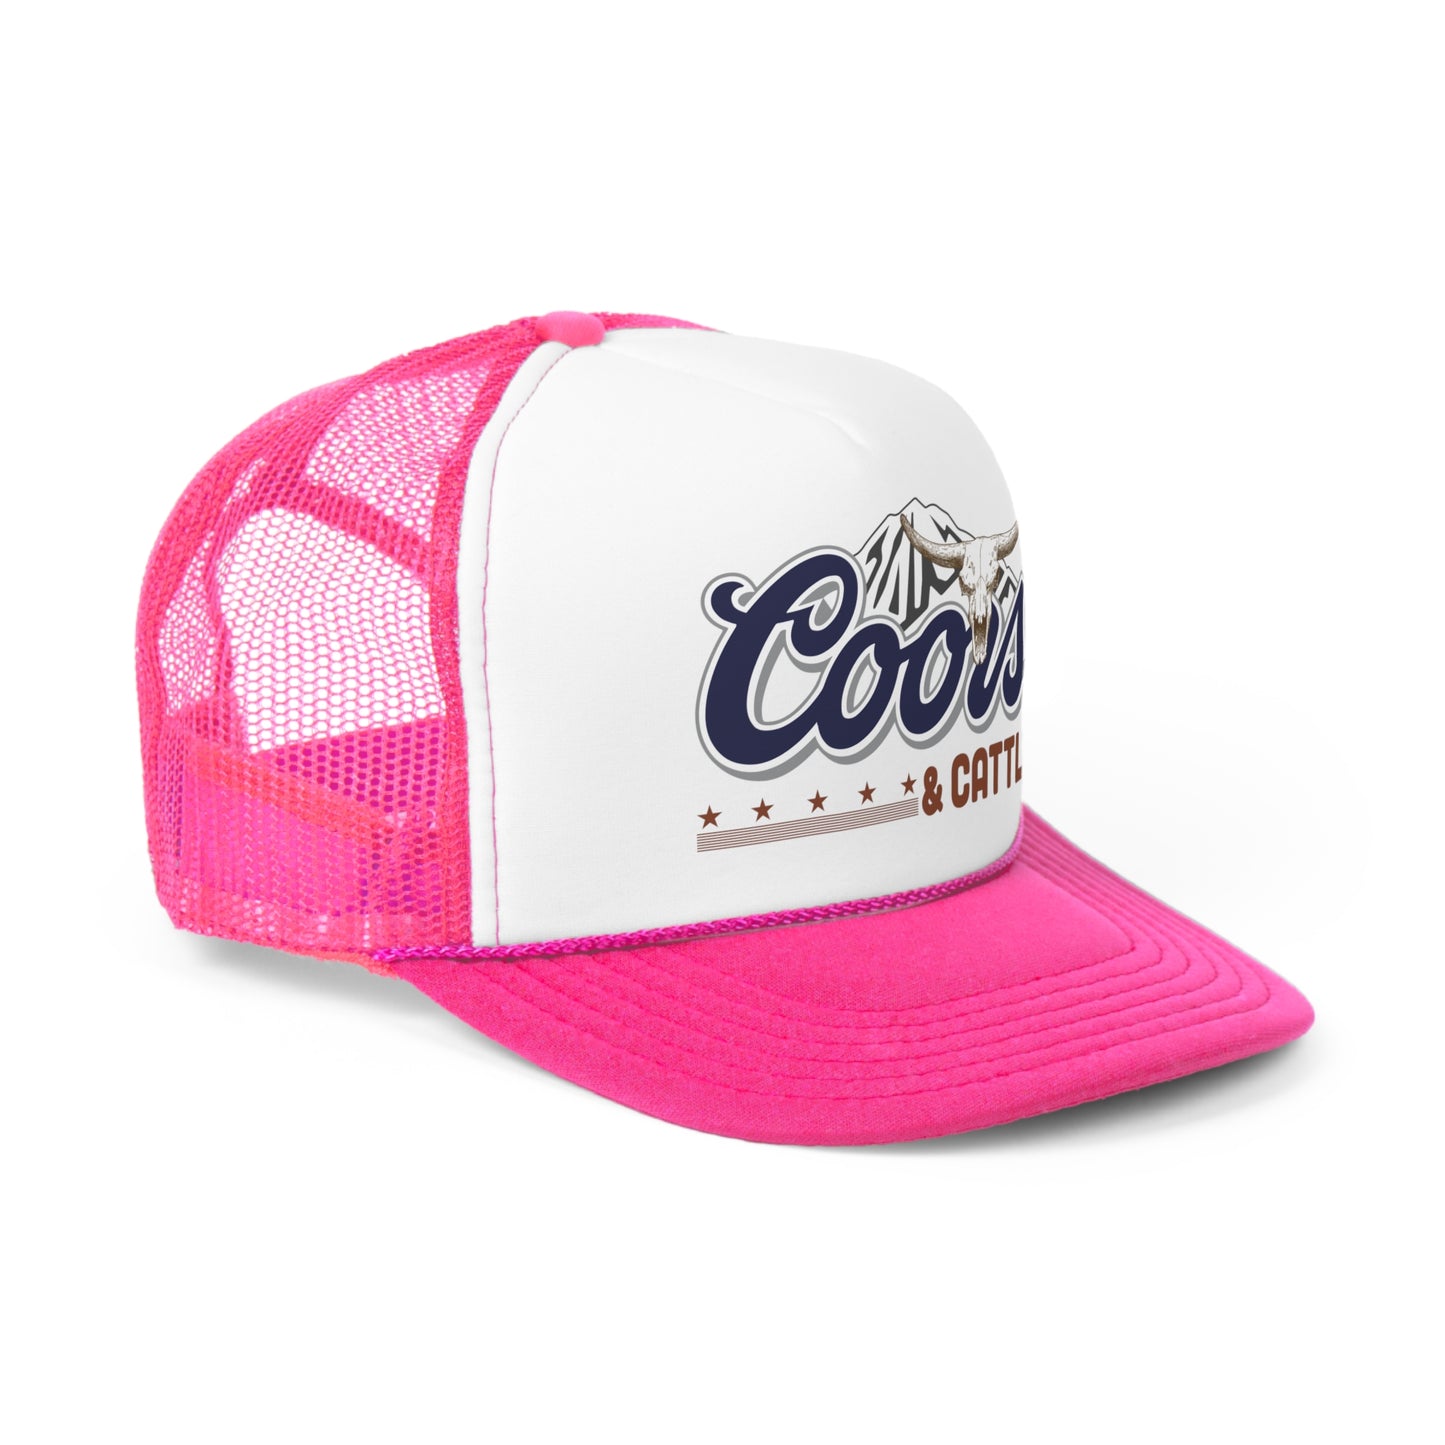 Coors and Cattle Tall Trucker Caps